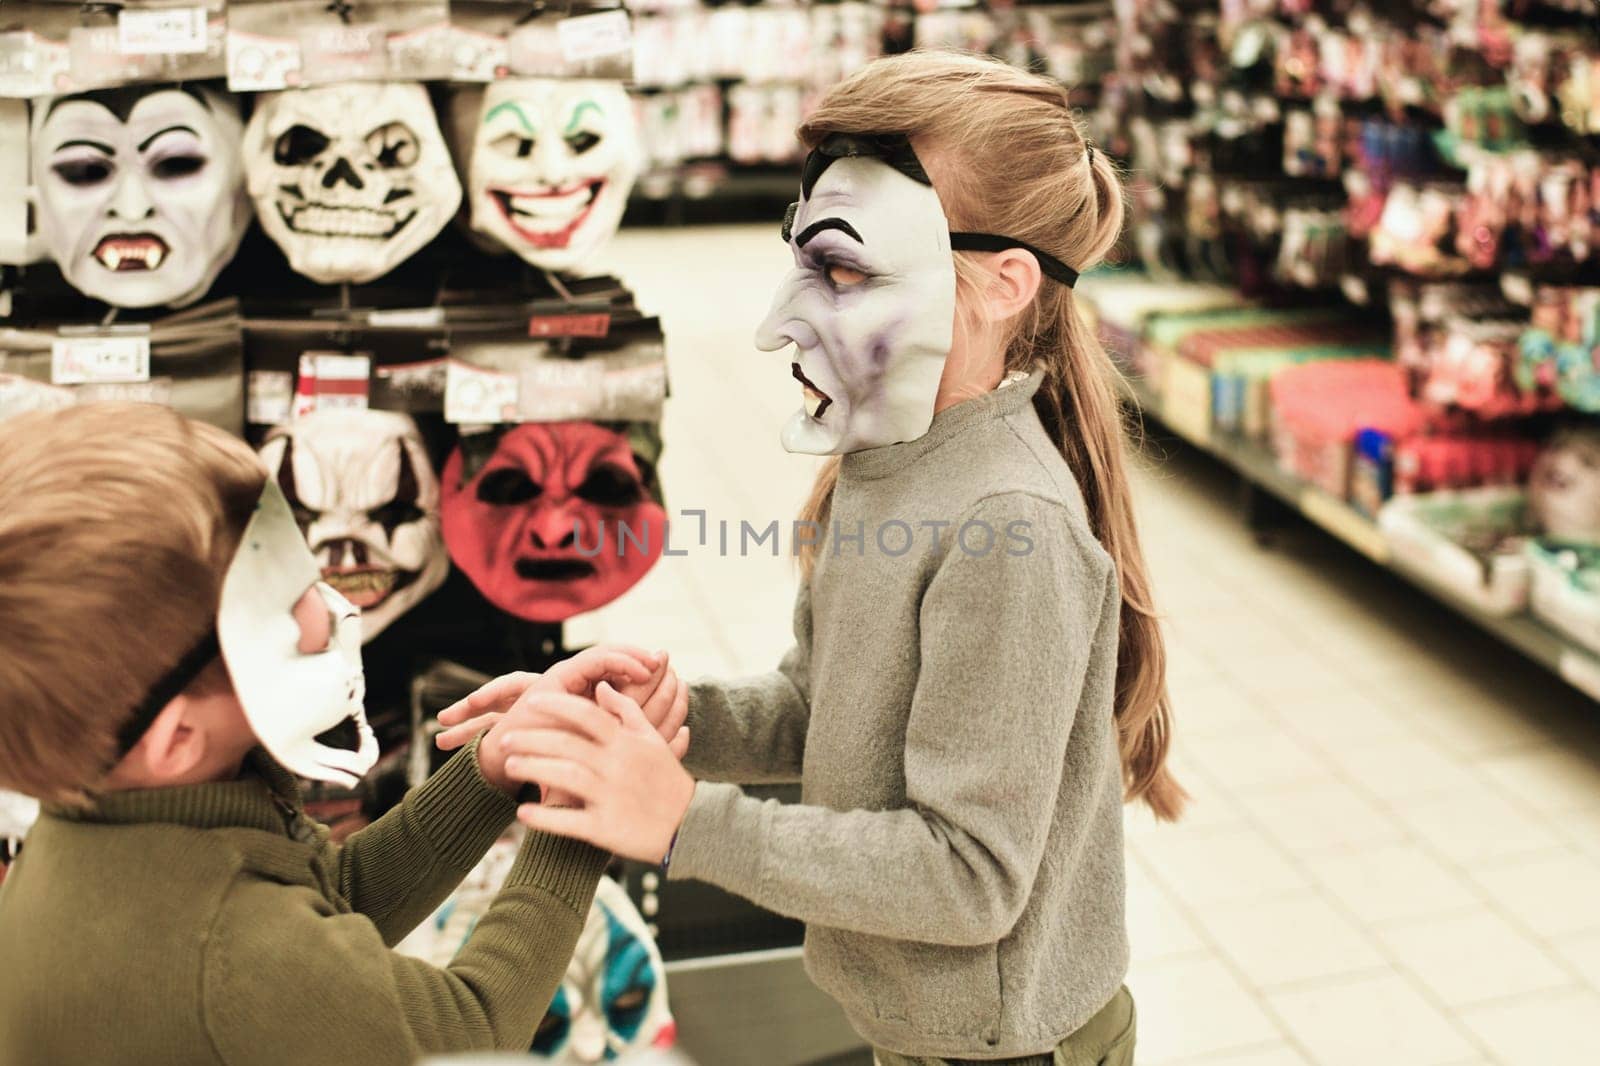 The kids chooses the masks at a store for halloween by Godi